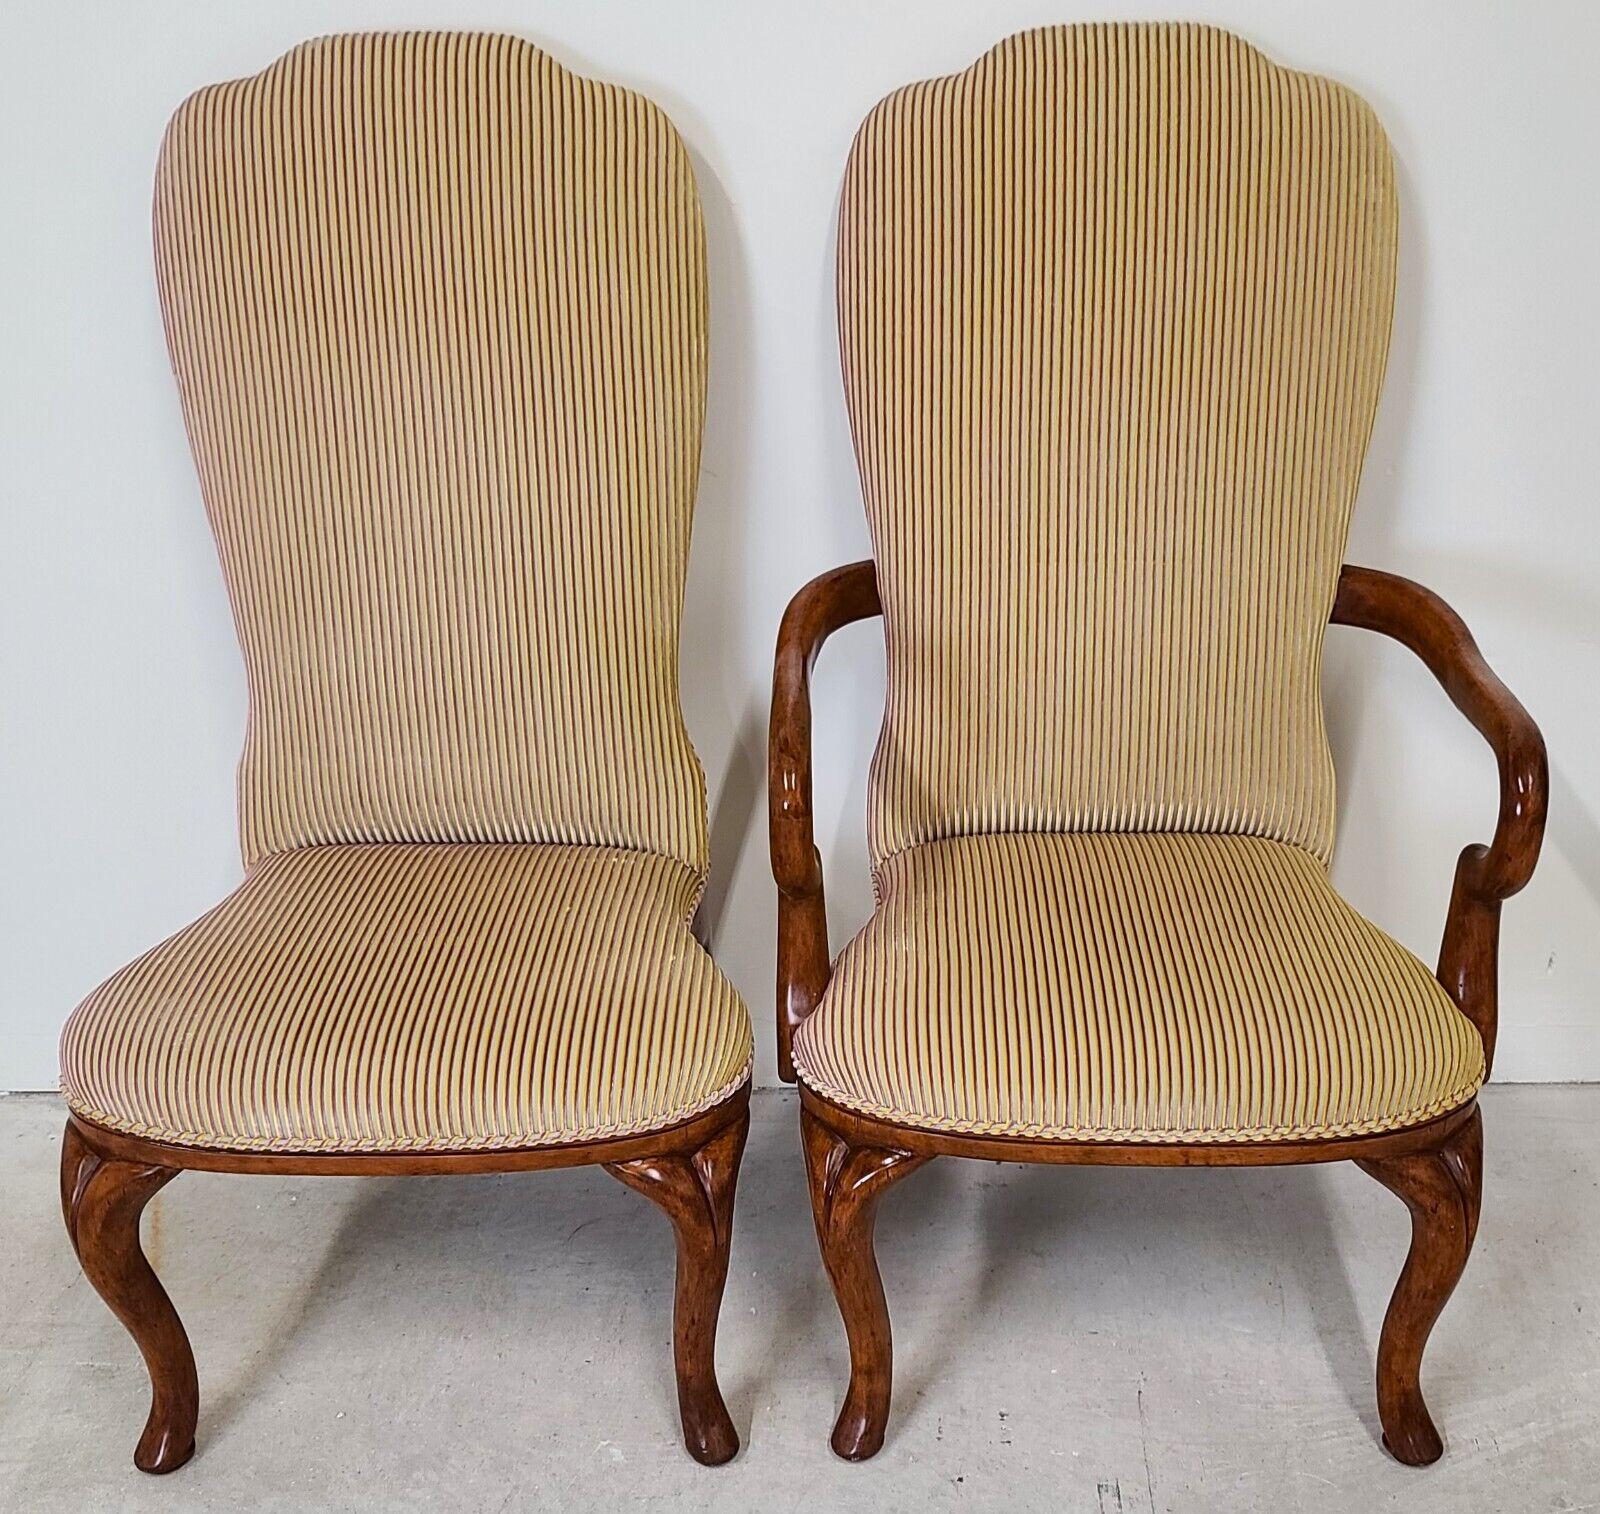 Unknown Italian Borghese Dining Chairs - Set of 10